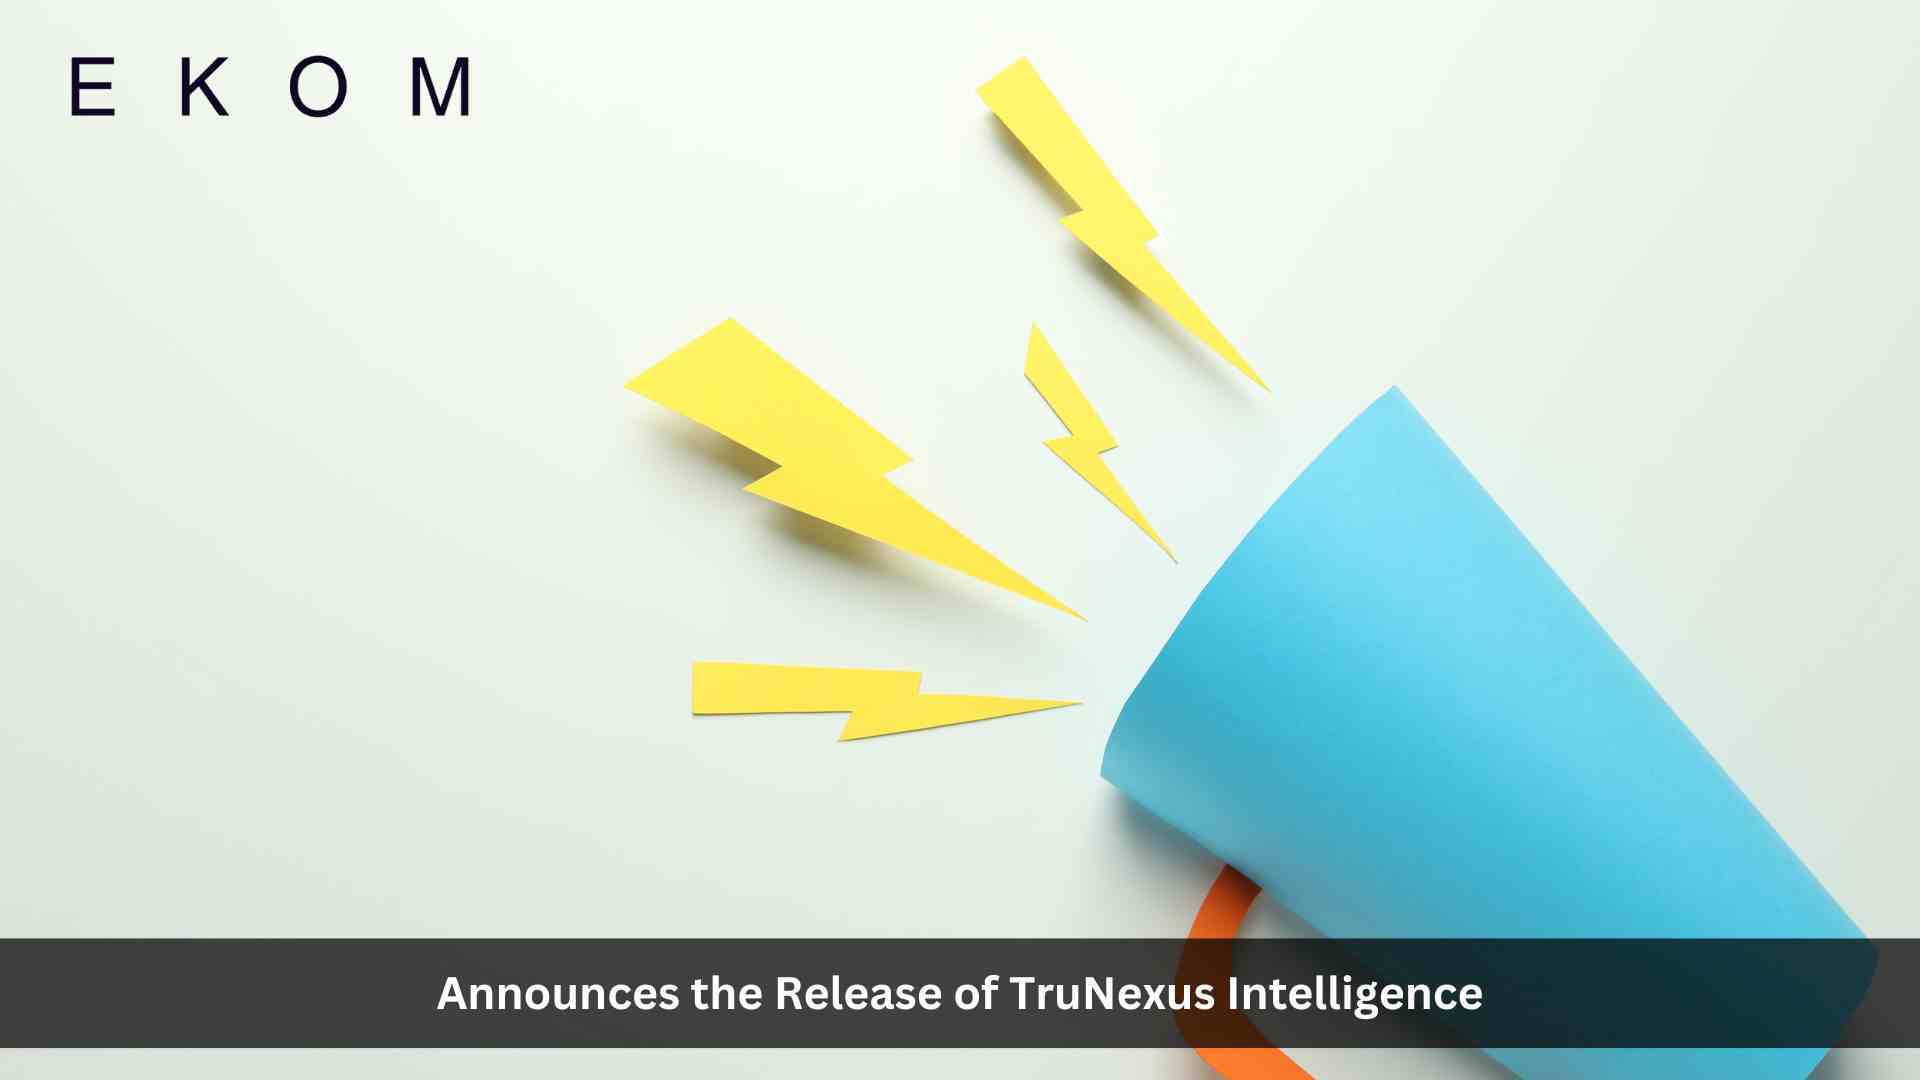 EKOM AI Announces the Release of TruNexus Intelligence™ for Brand and Retail Partners, Building on Unparalleled Accuracy and Brand Alignment for Digital Storefront Content